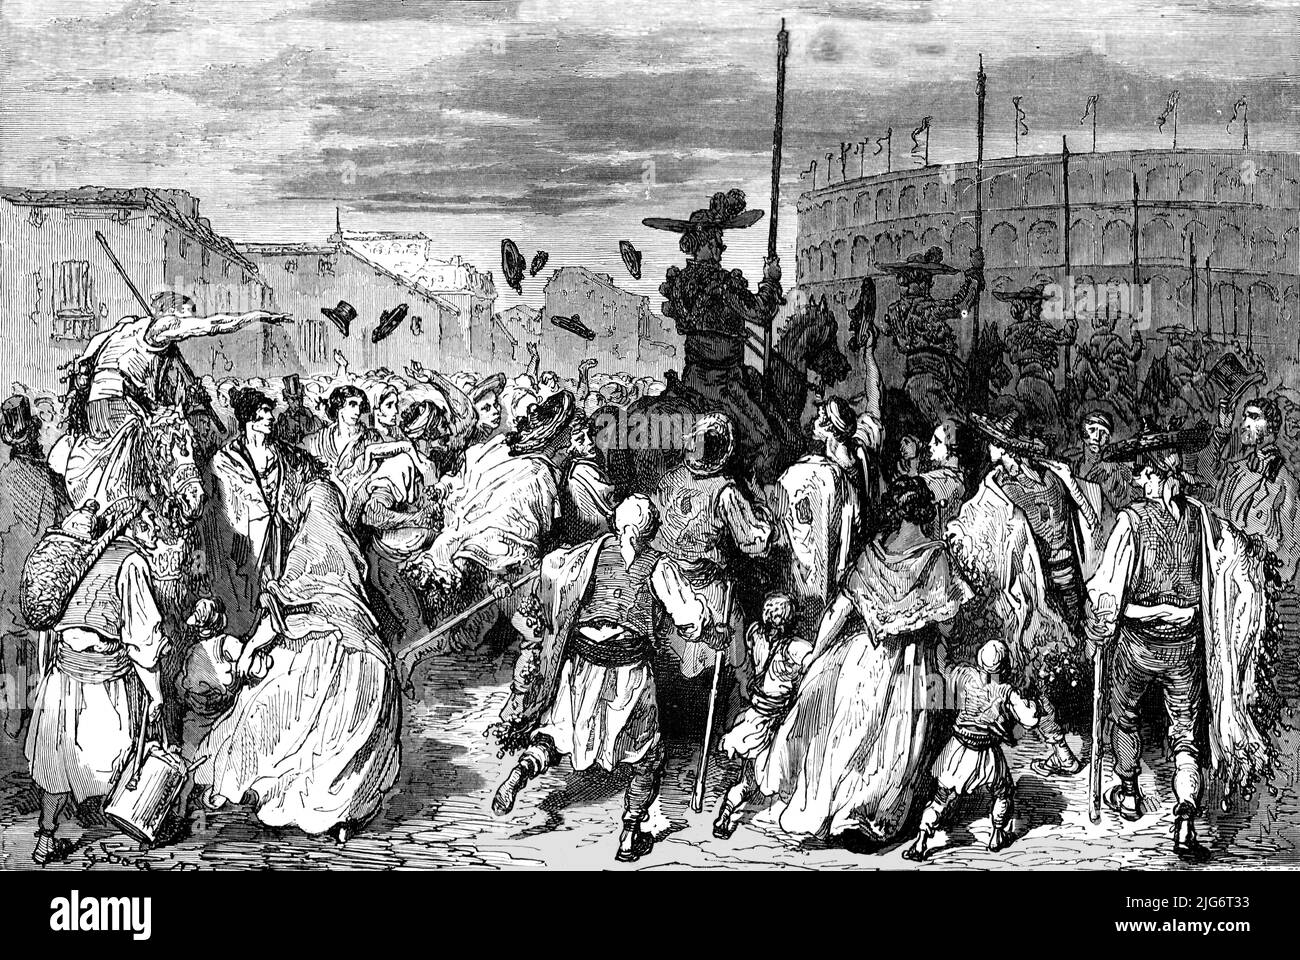 'Arrival of the Picadors; An Autumn Tour in Andalusia', 1875. [Scene outside the bullring in southern Spain]. From, 'Illustrated Travels' by H.W. Bates. [Cassell, Petter, and Galpin, c1880, London] Belle Sauvage Works.London E.C. Stock Photo